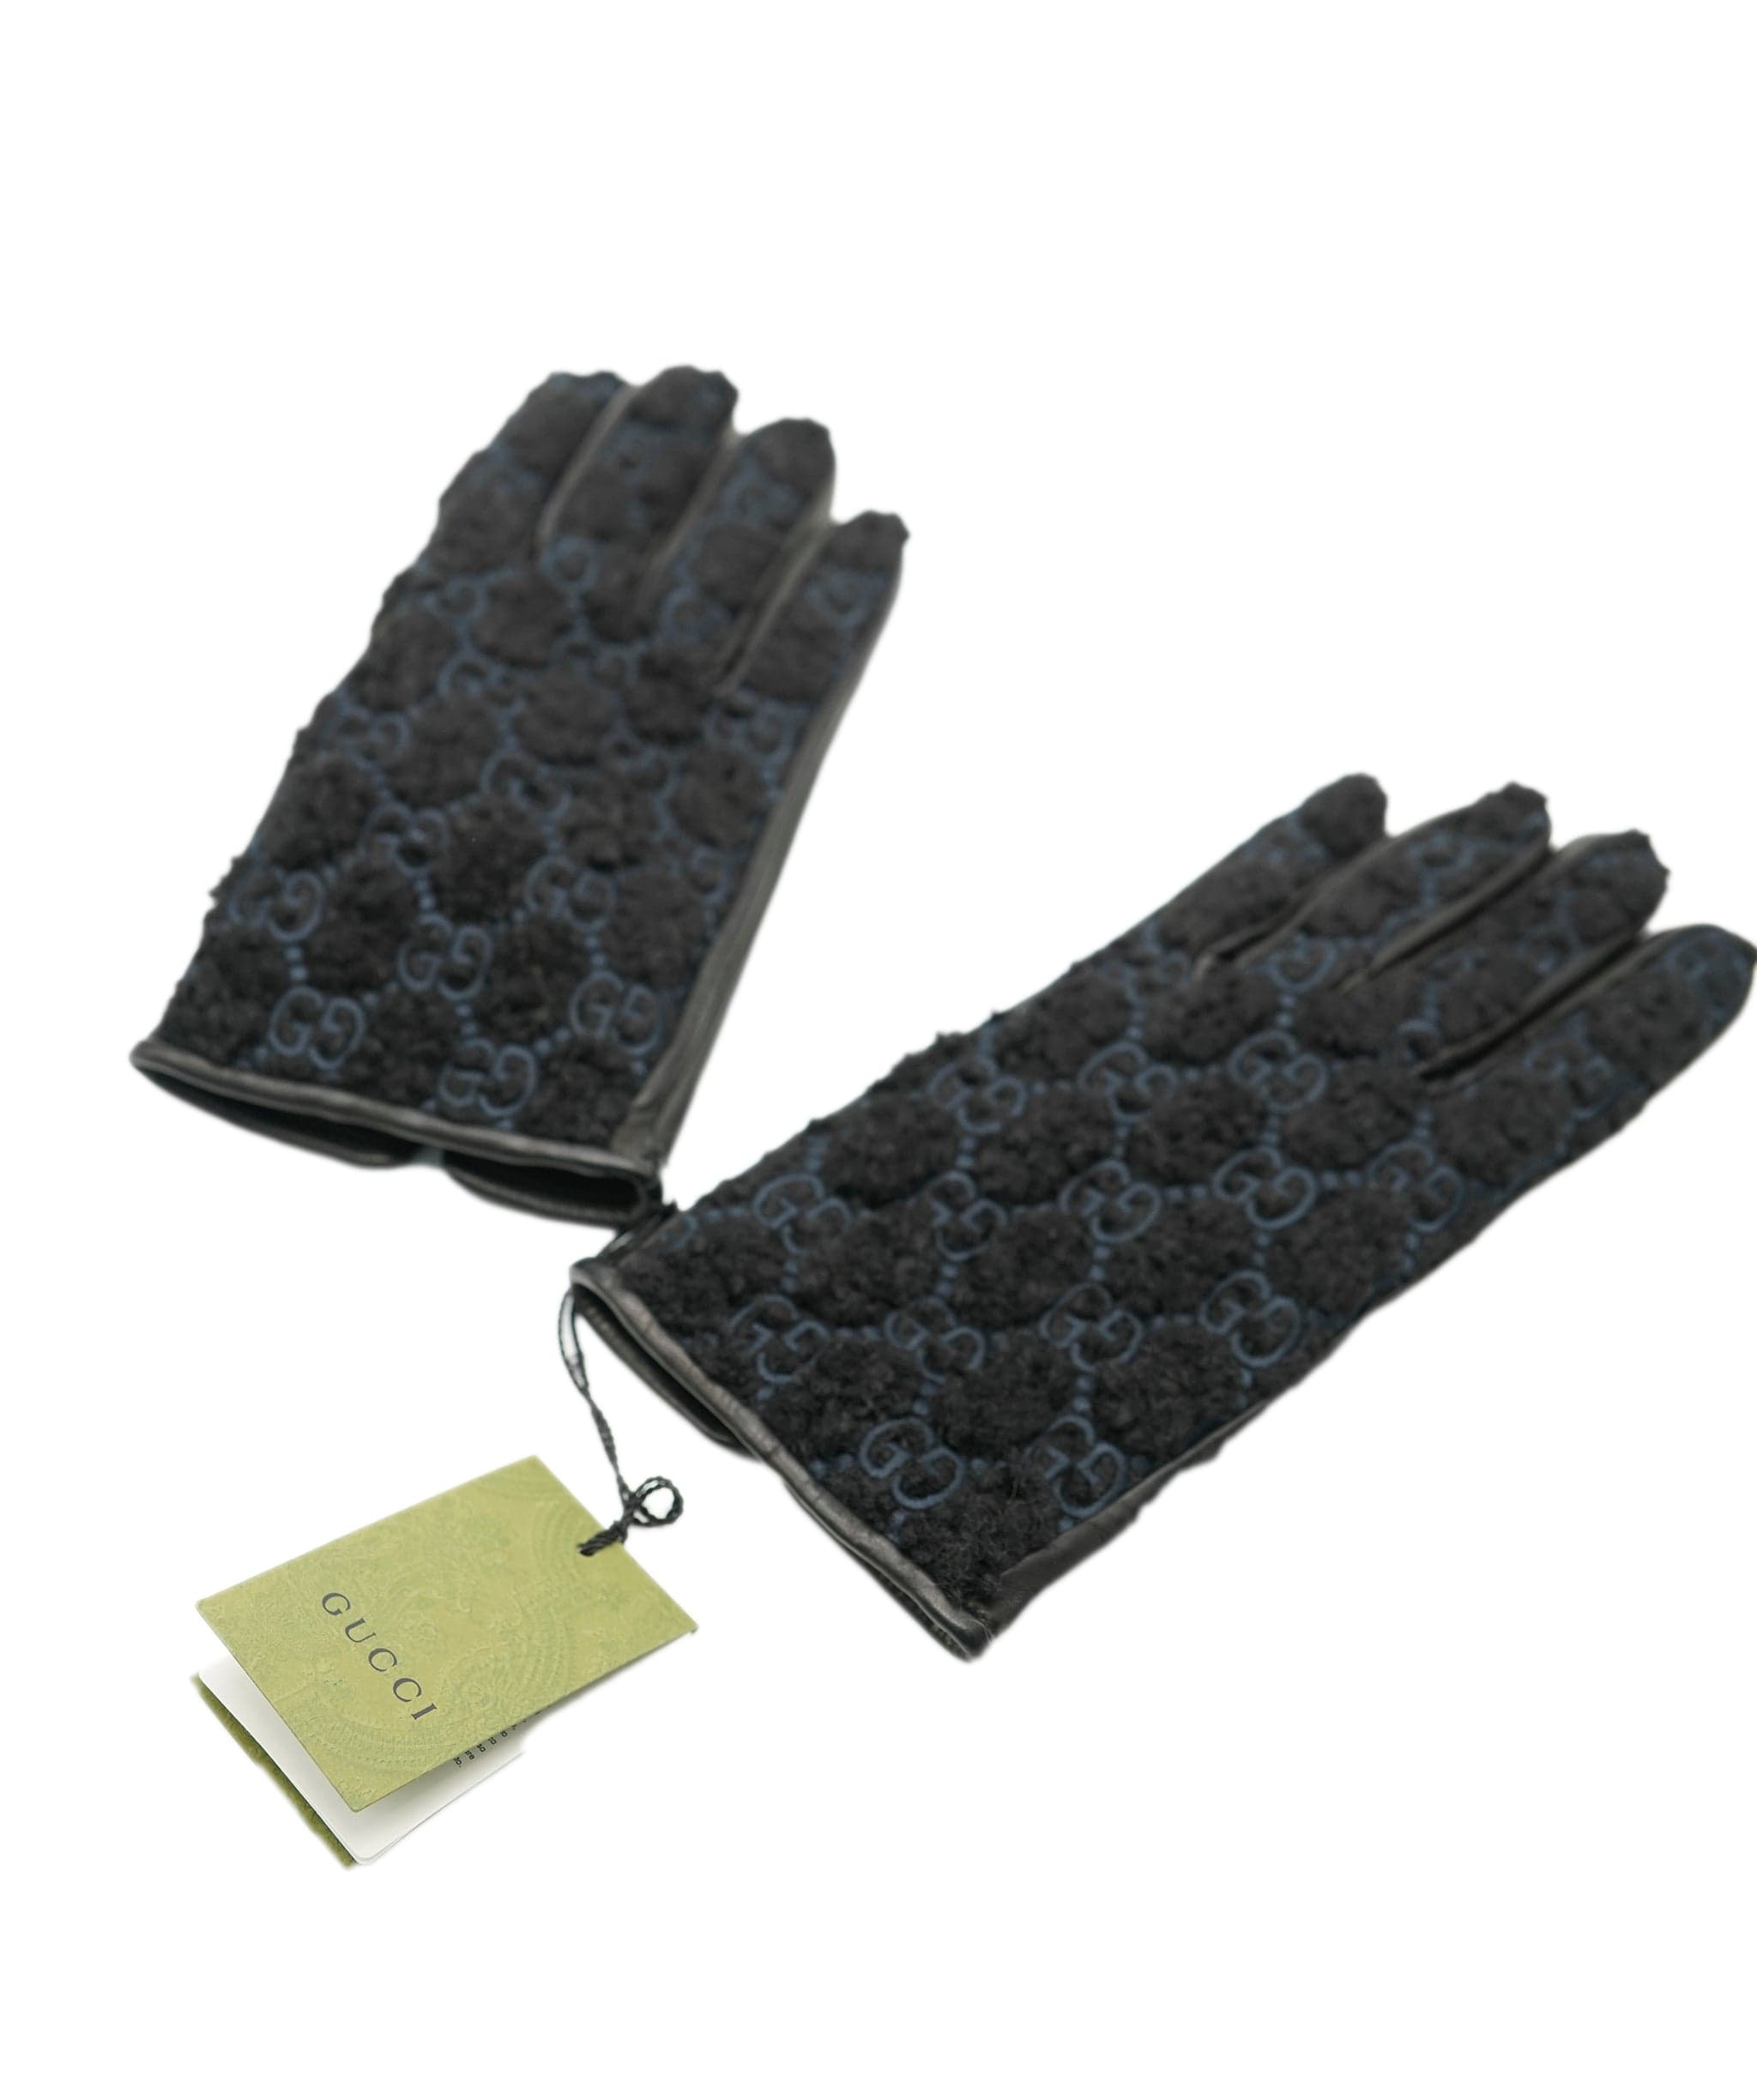 Gucci Gucci Black Embroided Gloves size 9  AVL1430